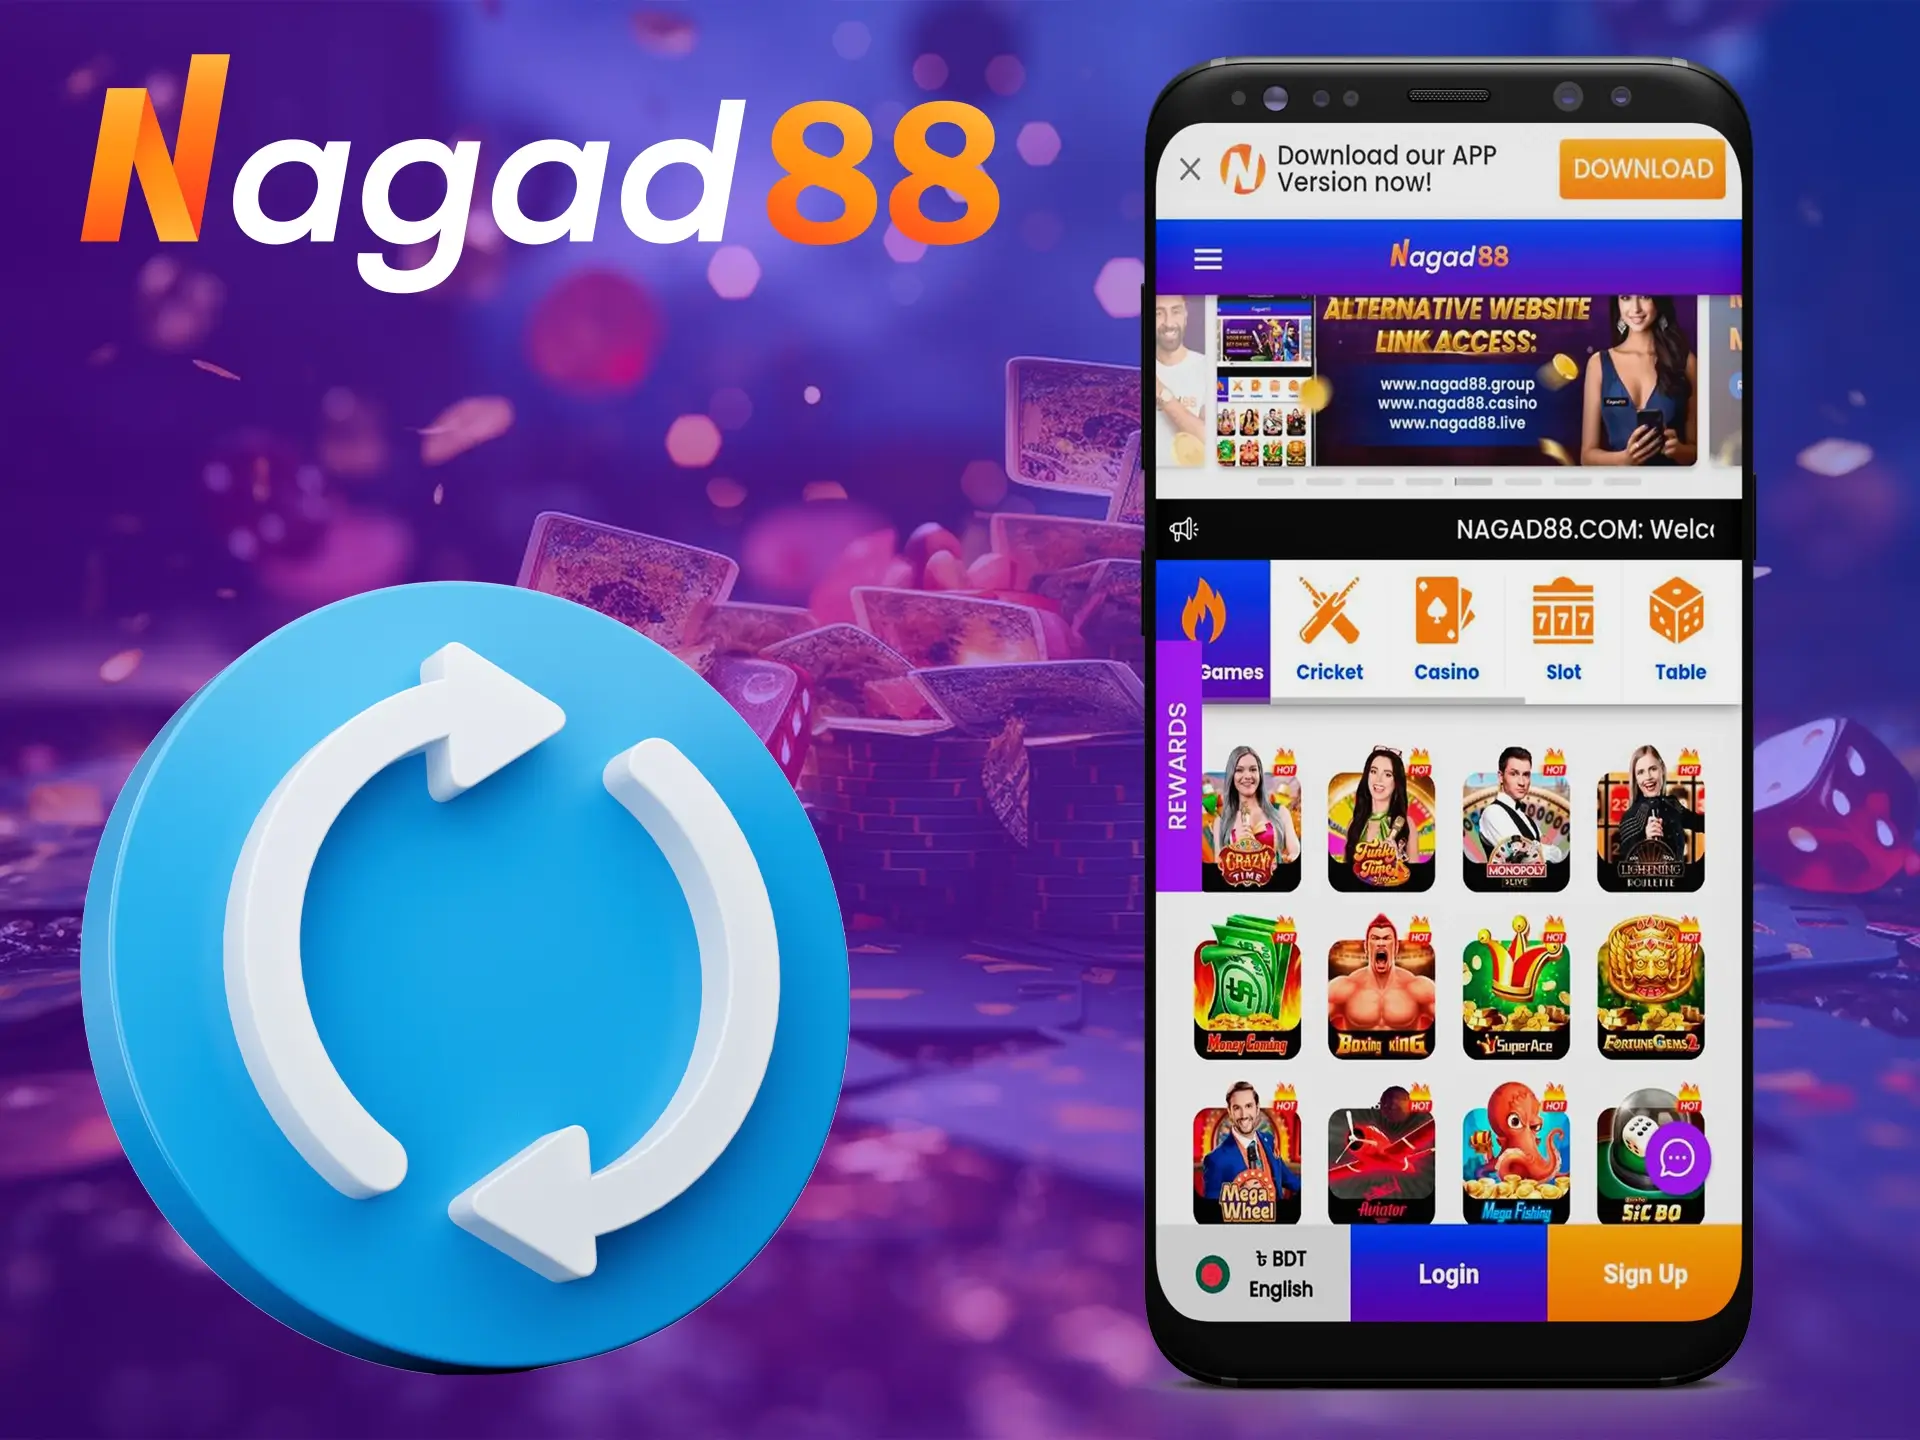 Update the Nagad88 app to get new features.